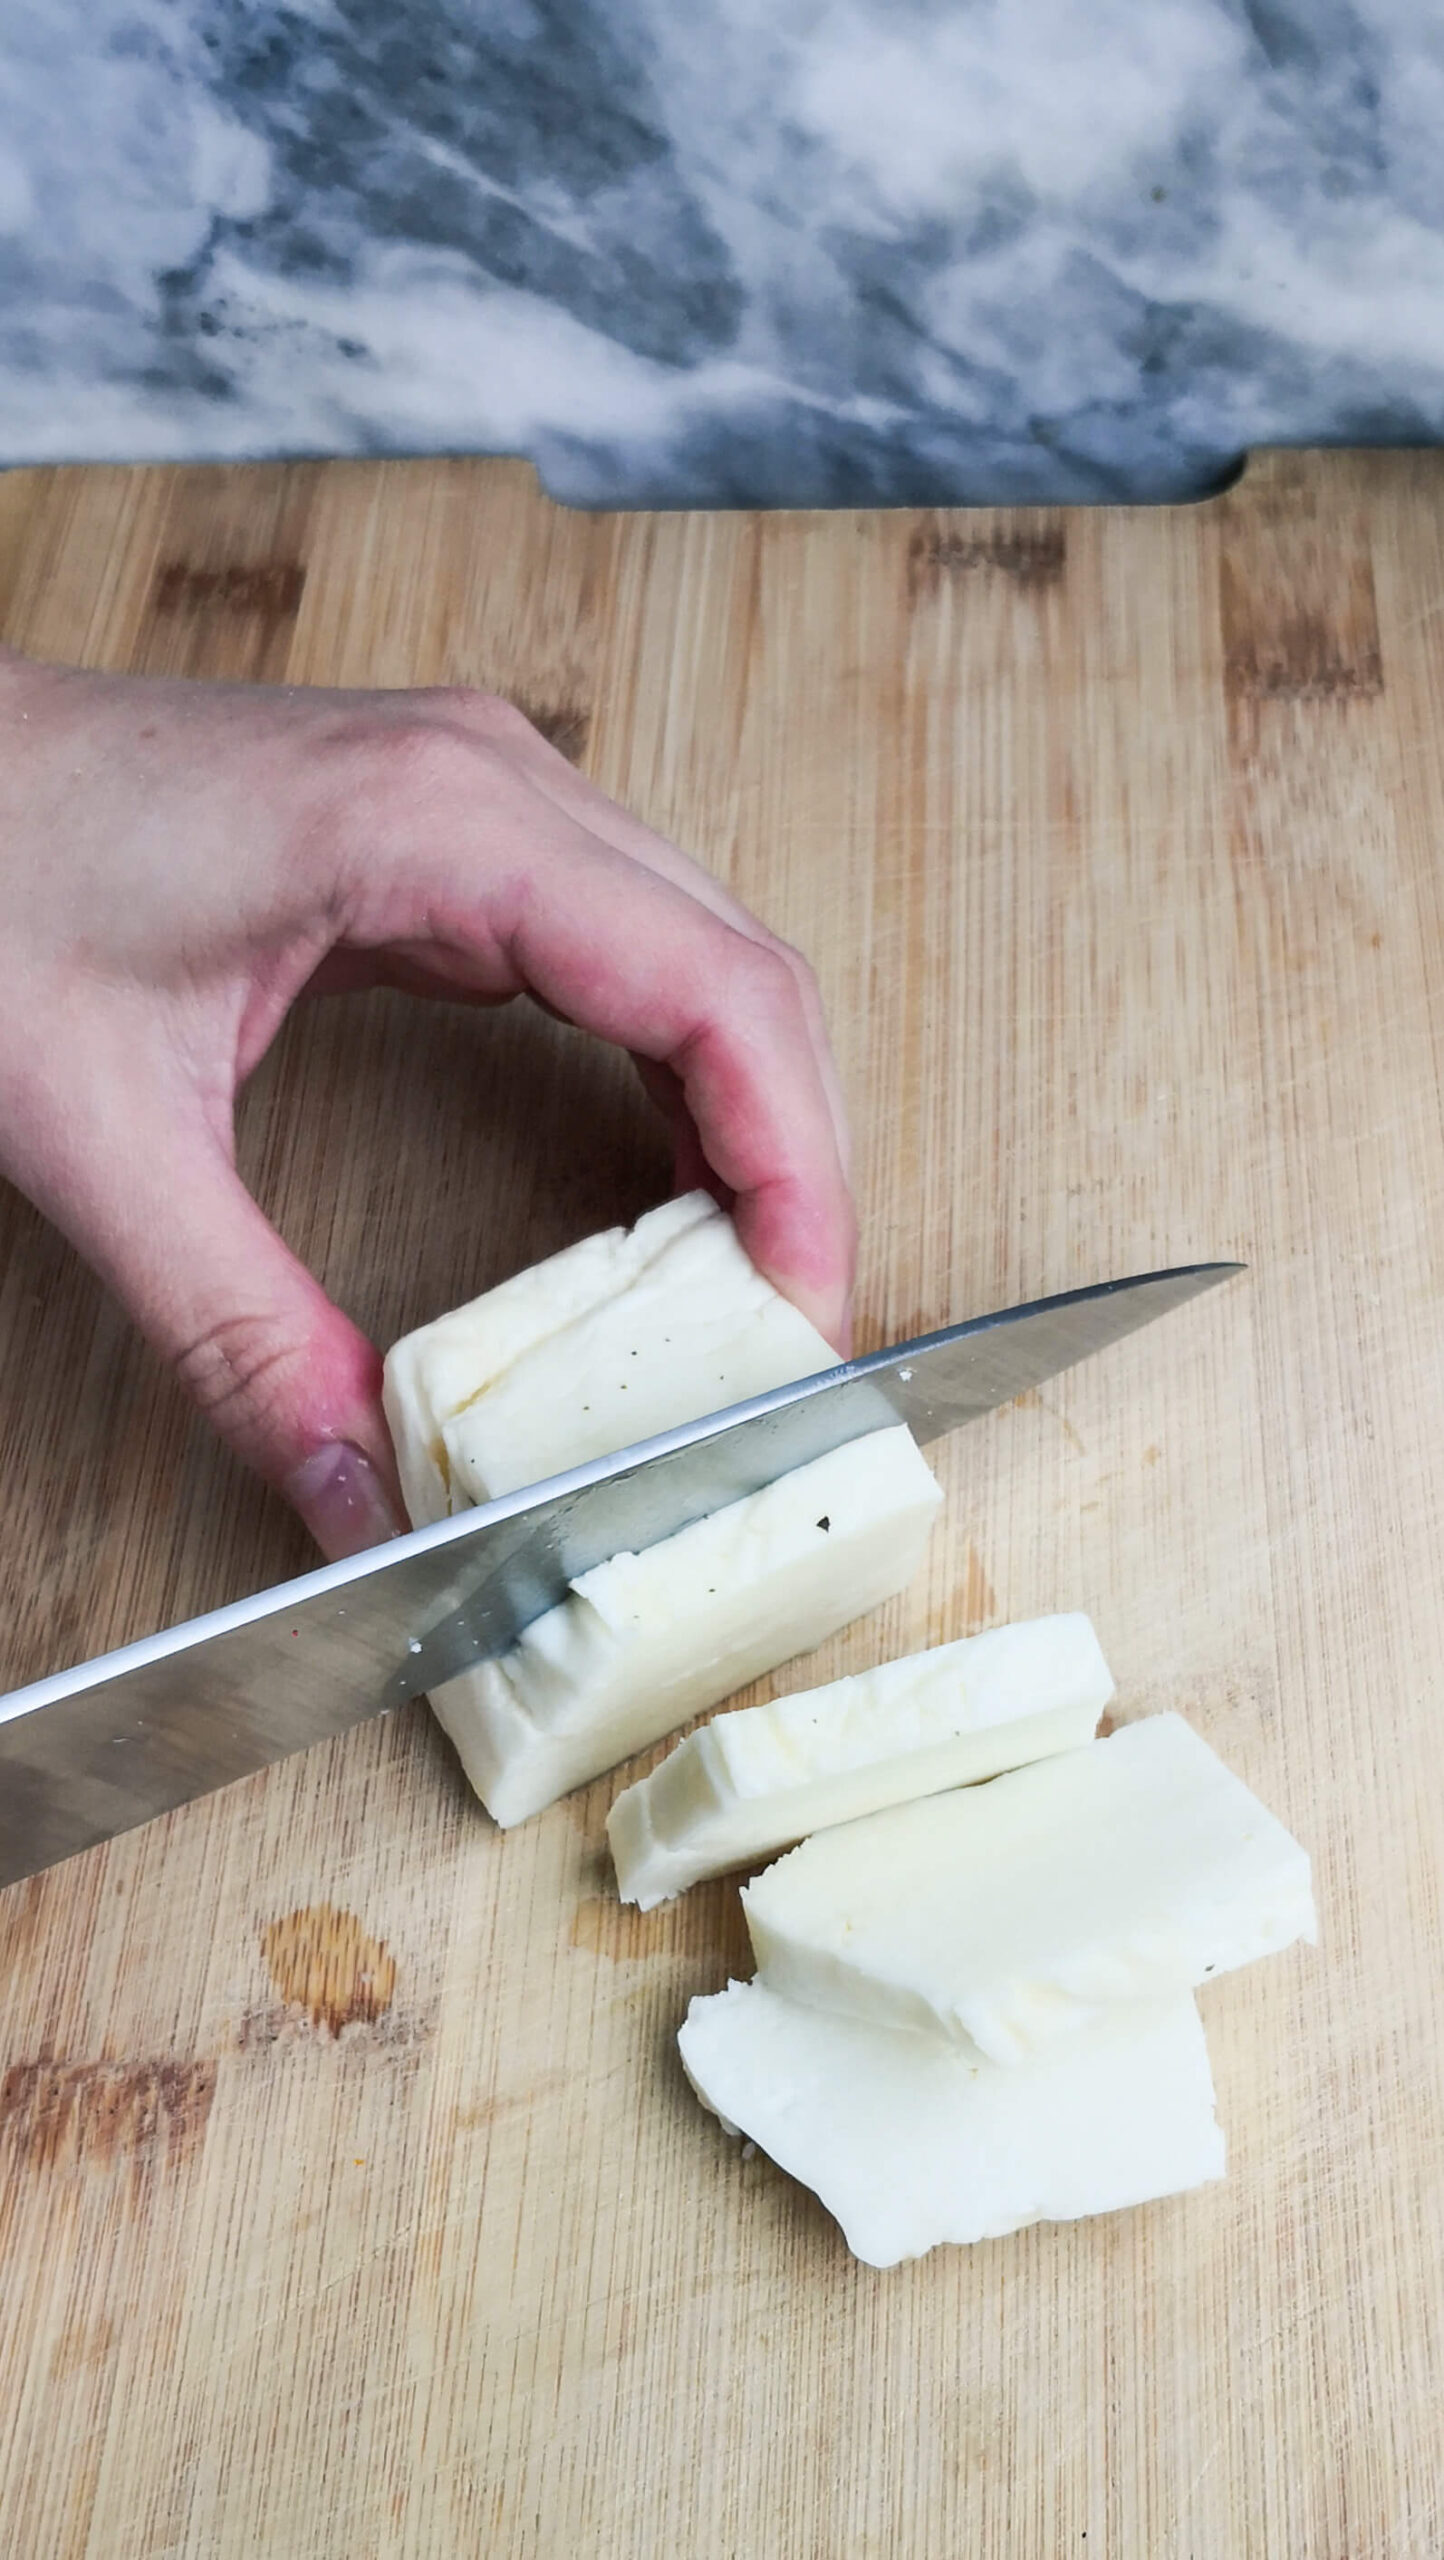 Chopping halloumi into slices on a wooden board.